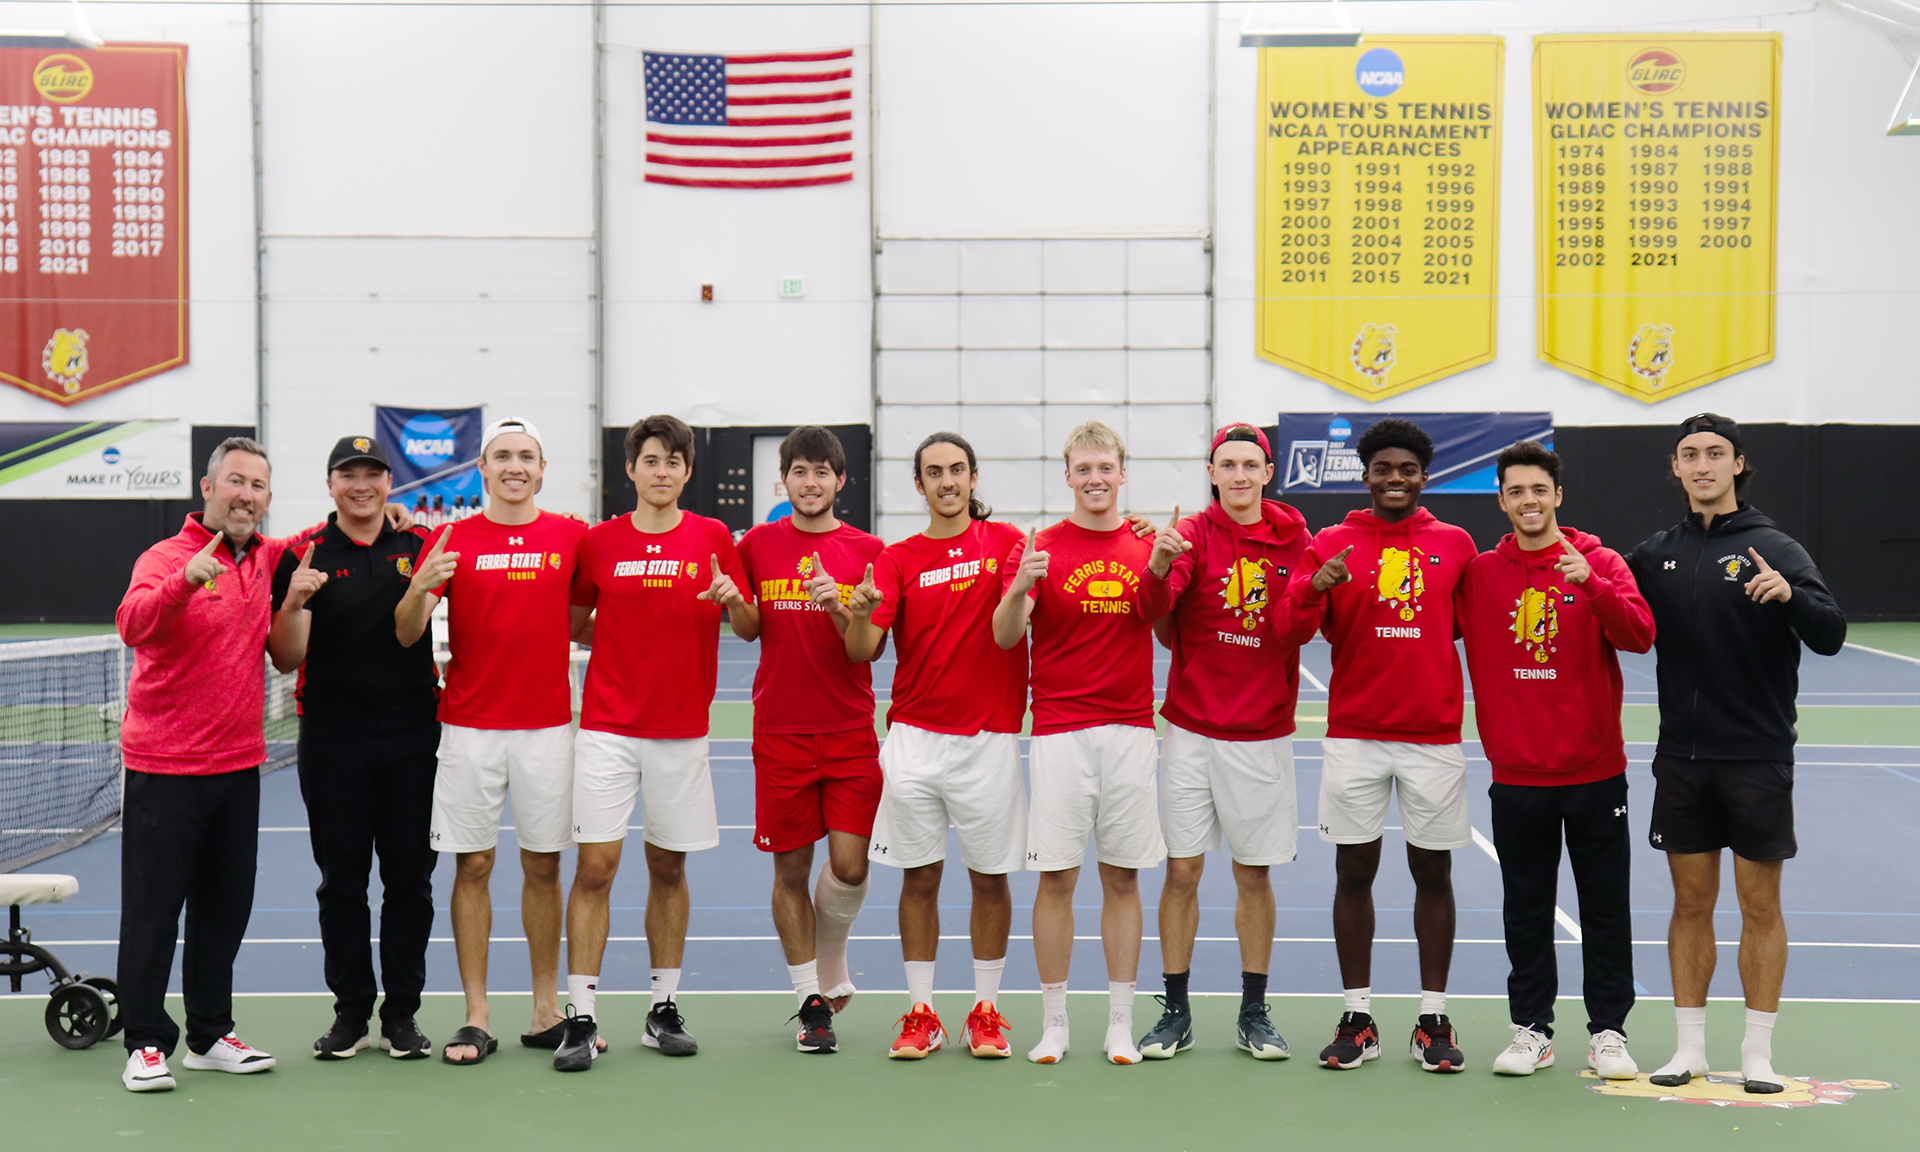 Ferris State men’s tennis team earns 21st GLIAC championship with win over Lake Superior State